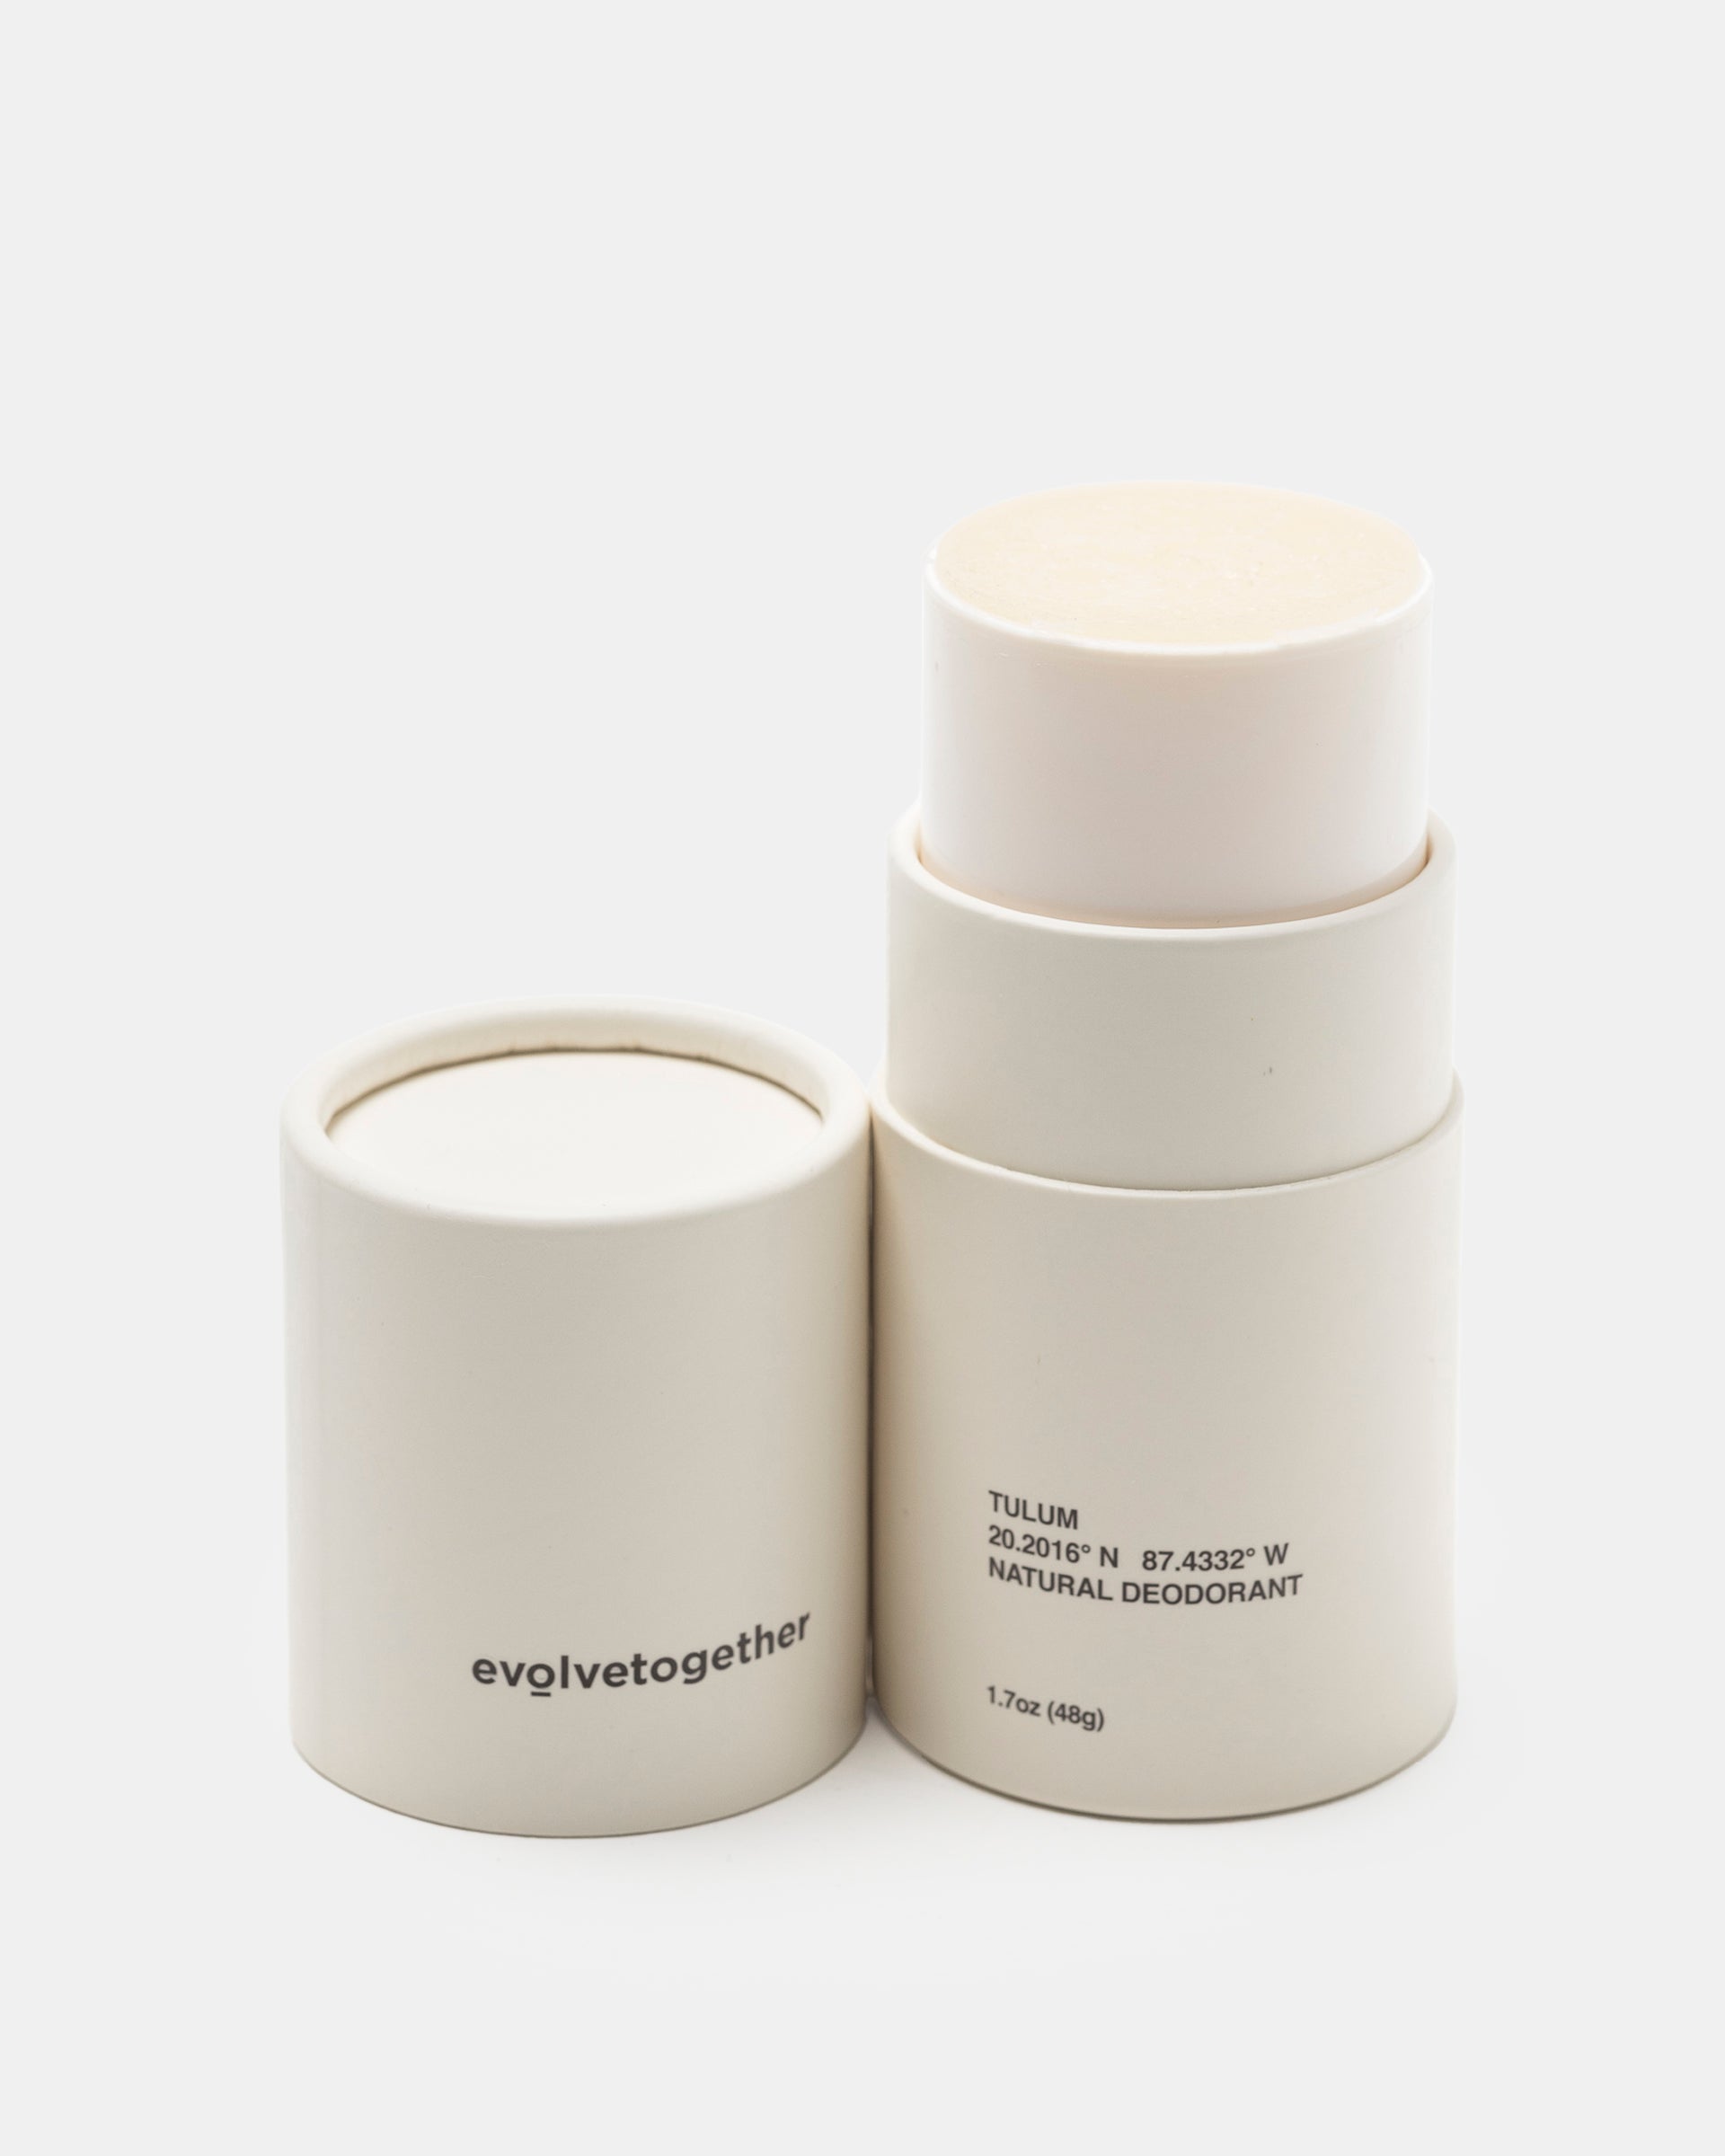 Evolve Together Tulum Deodorant with lid removed Roden Gray